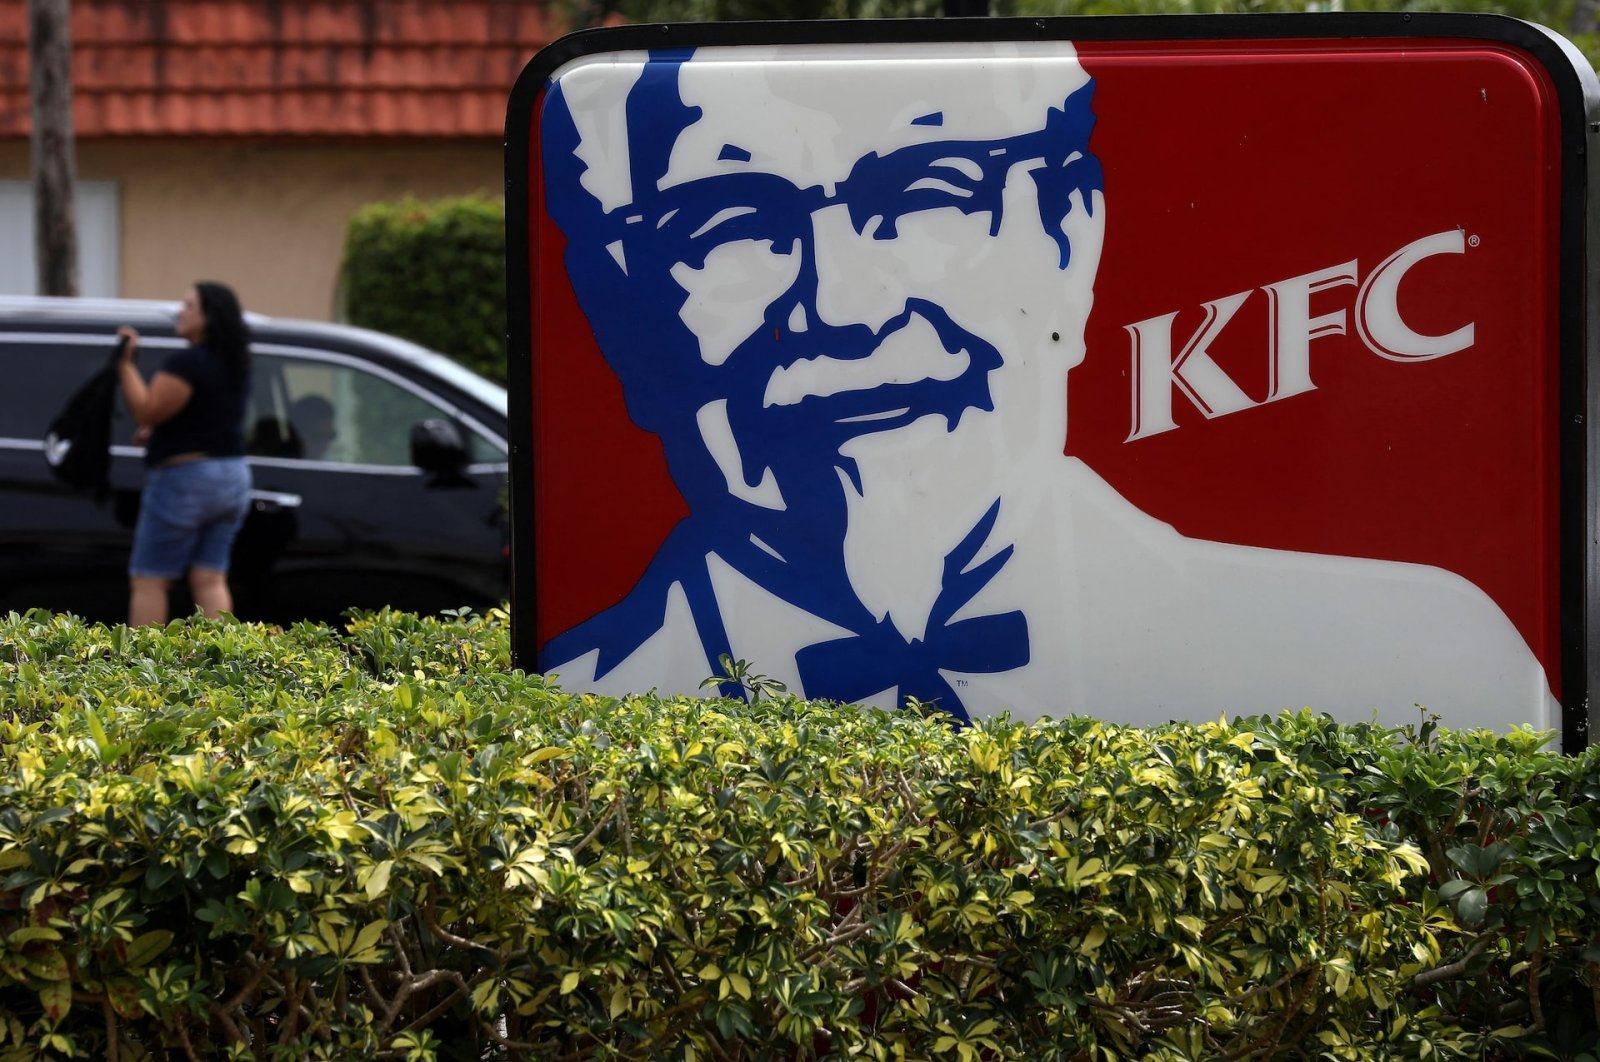 A Kentucky Fried Chicken (KFC) logo is pictured on a sign in North Miami Beach, Florida, U.S. April 6, 2017. (Reuters Photo)